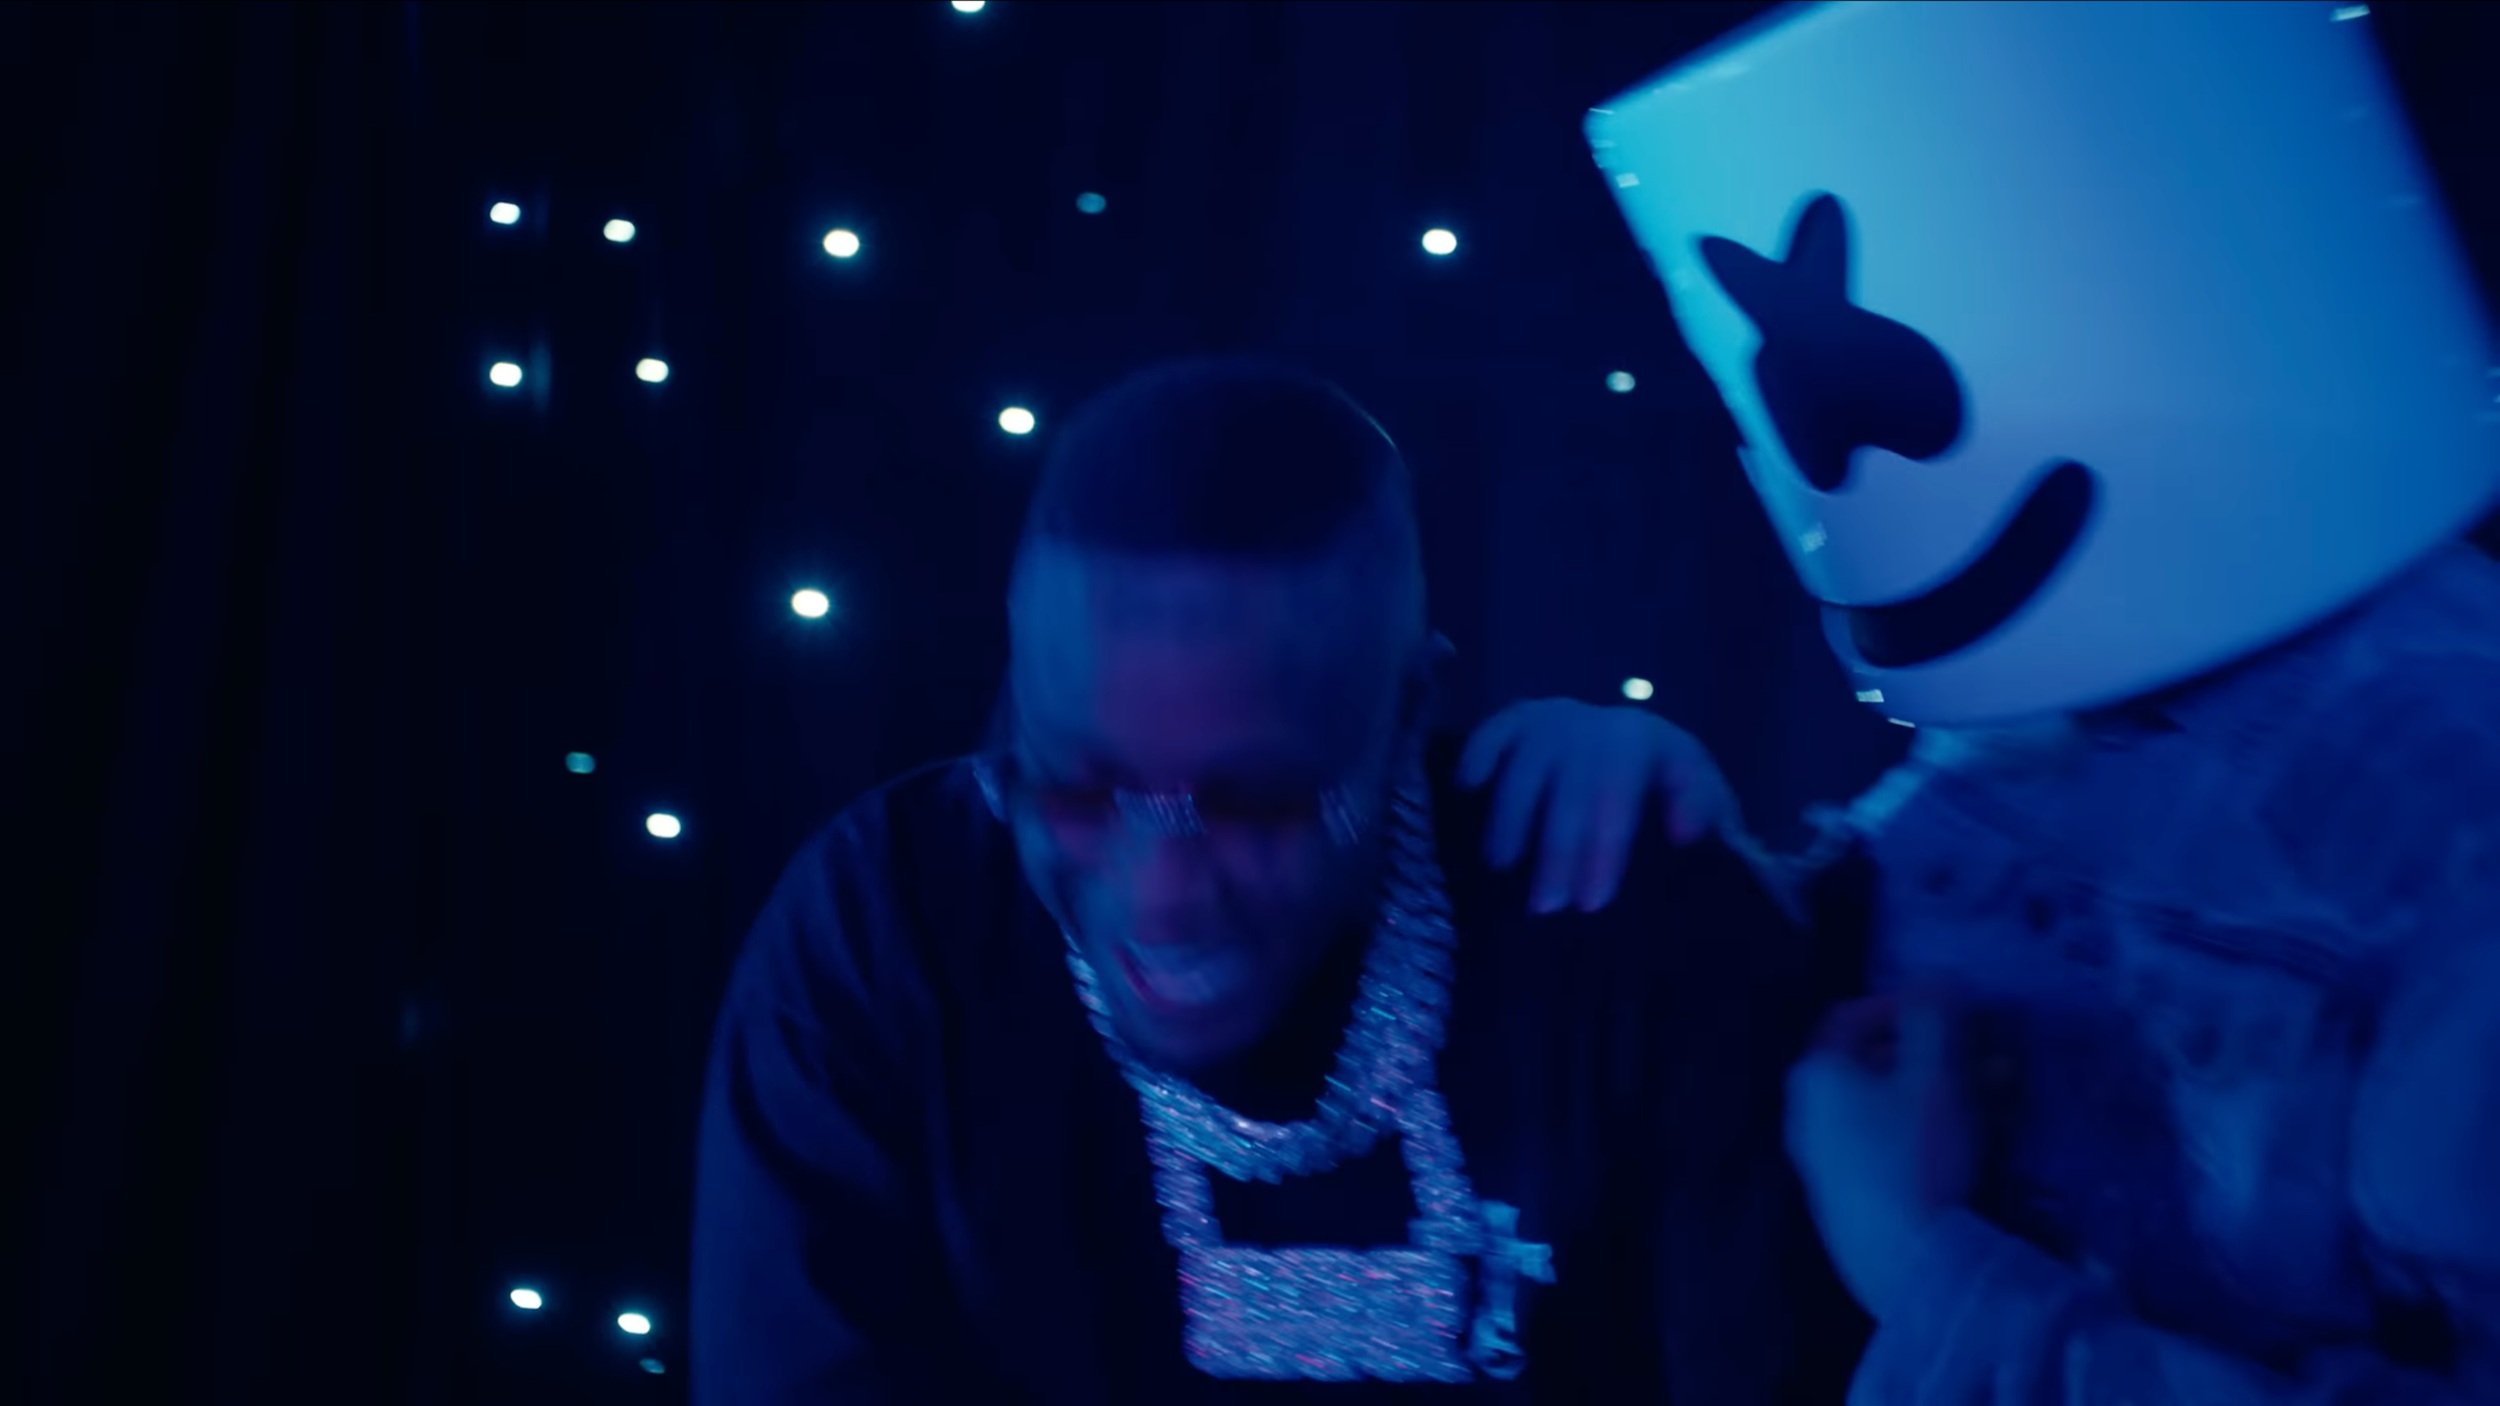 Marshmello and Southside Vibing in music video for hit single “Grown Man”